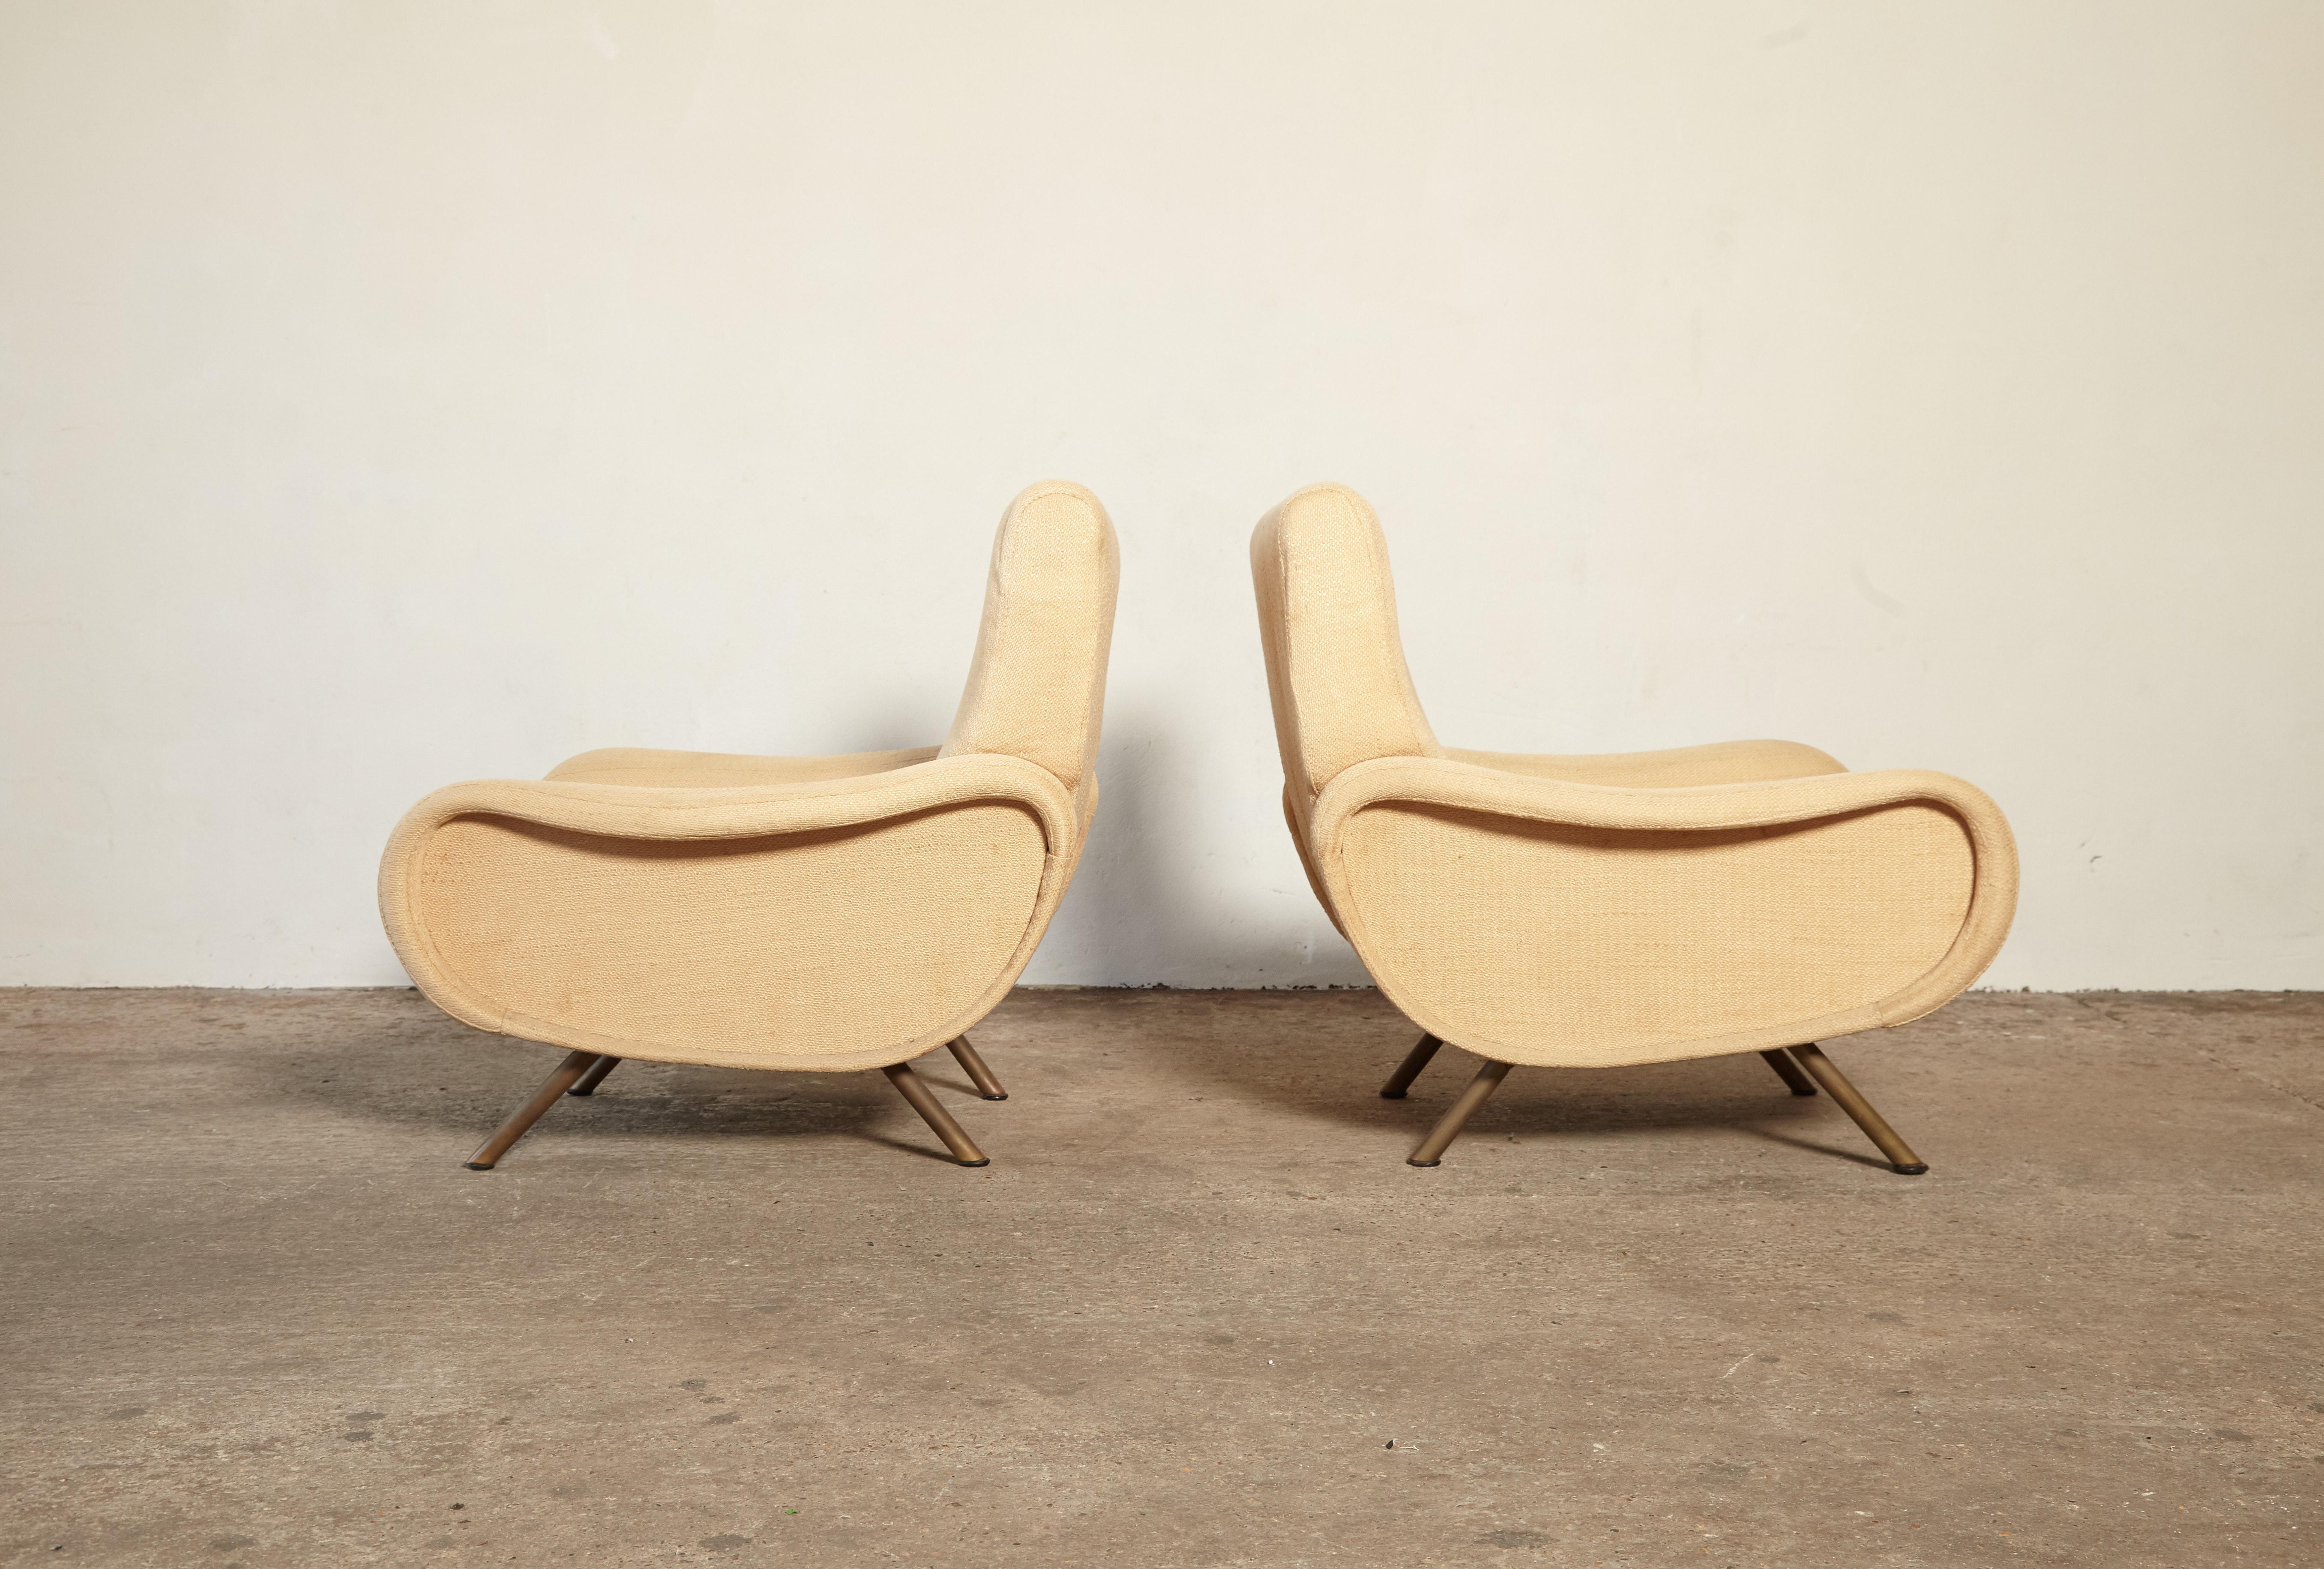 Italian Marco Zanuso Lady Chairs, Arflex, Italy, 1950s, Includes Reupholstery in COM